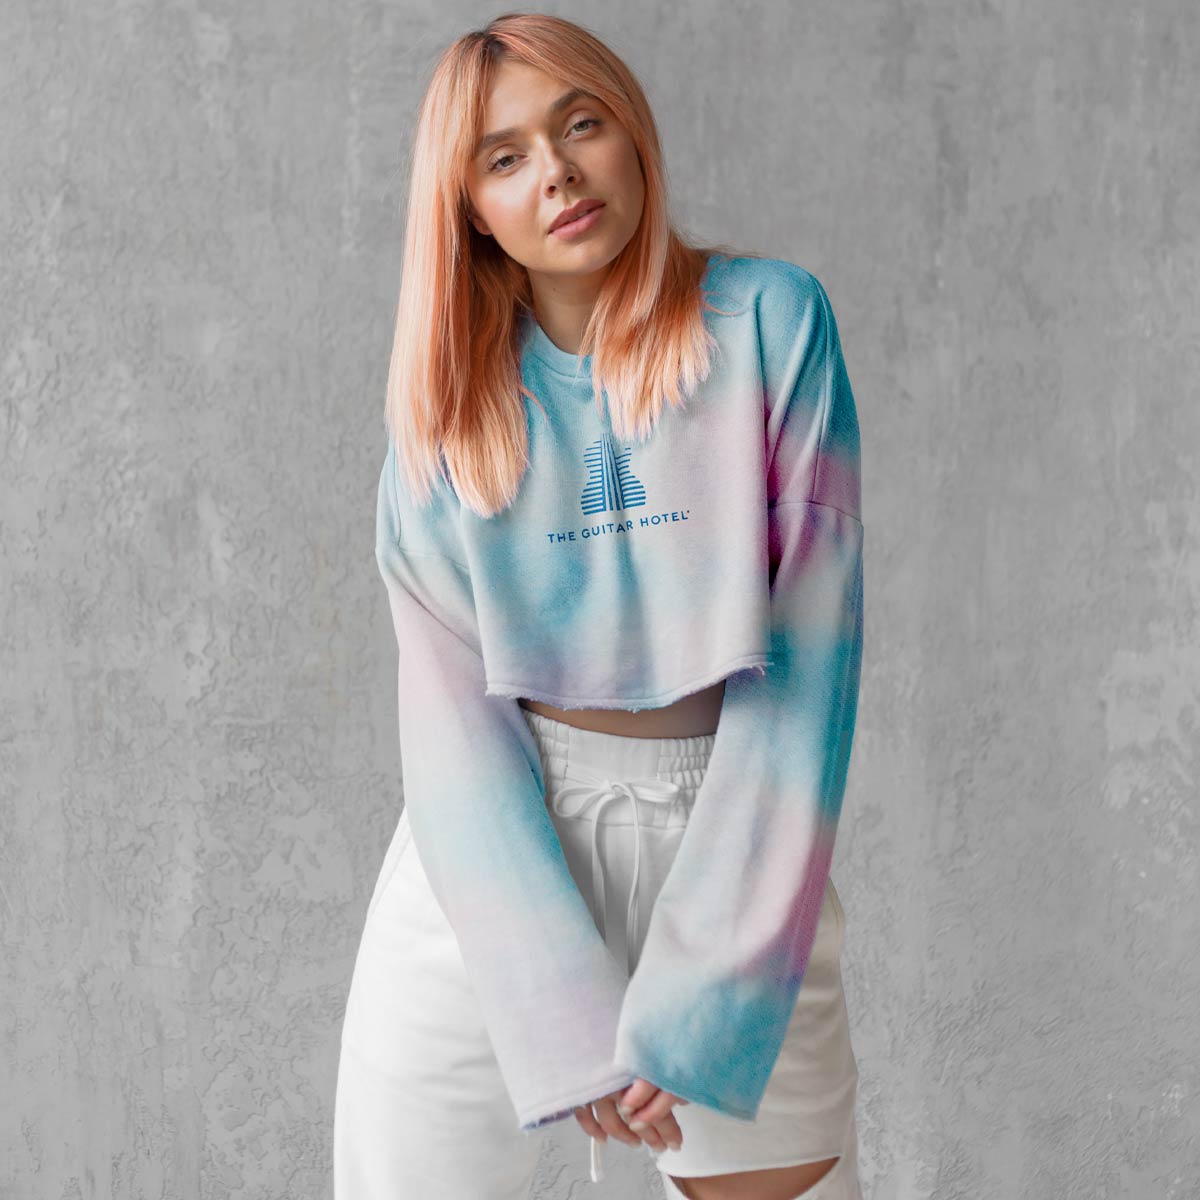 Guitar Hotel Cotton Candy Cropped Sweatshirt image number 3